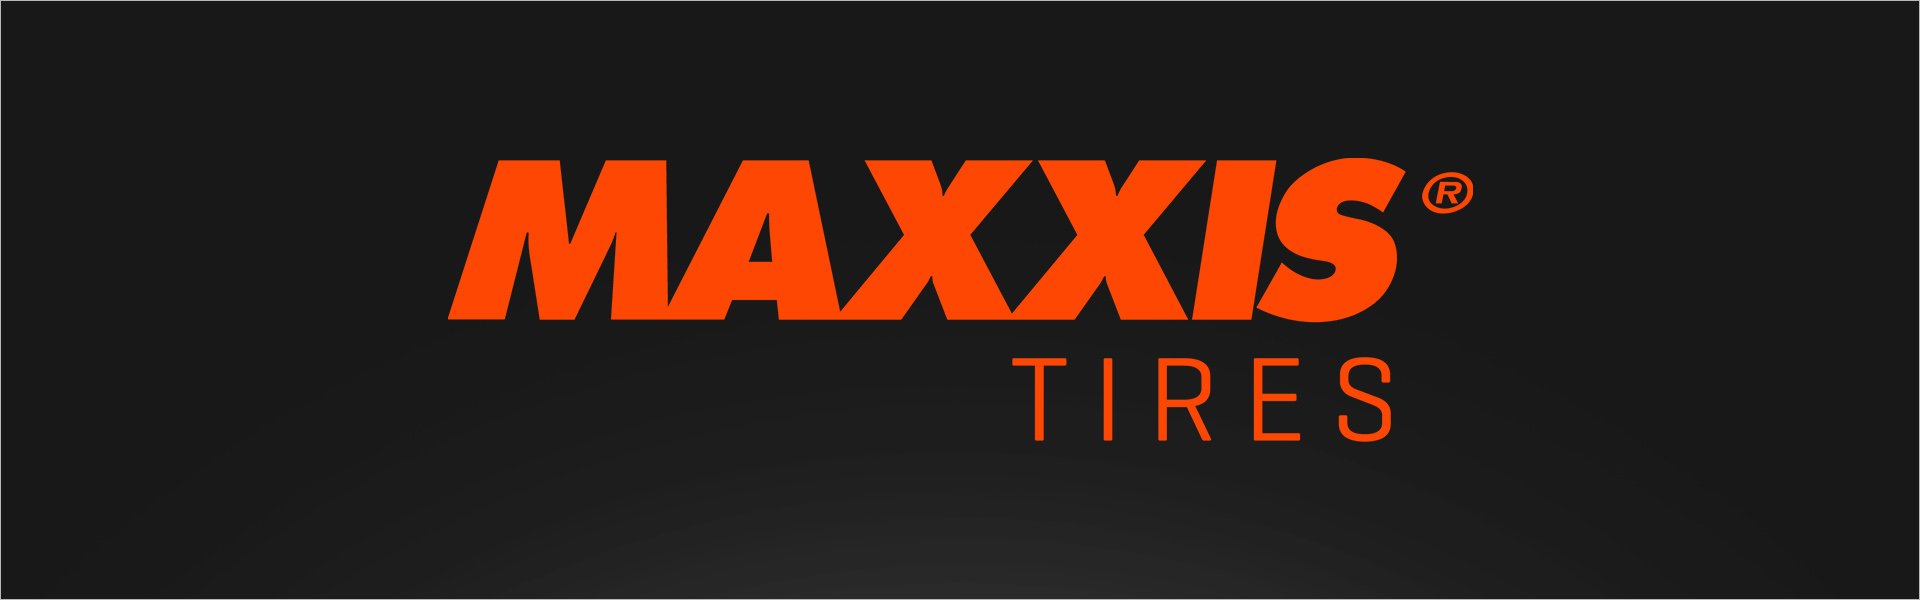 Maxxis ME3 185/65R14 86 H Maxxis